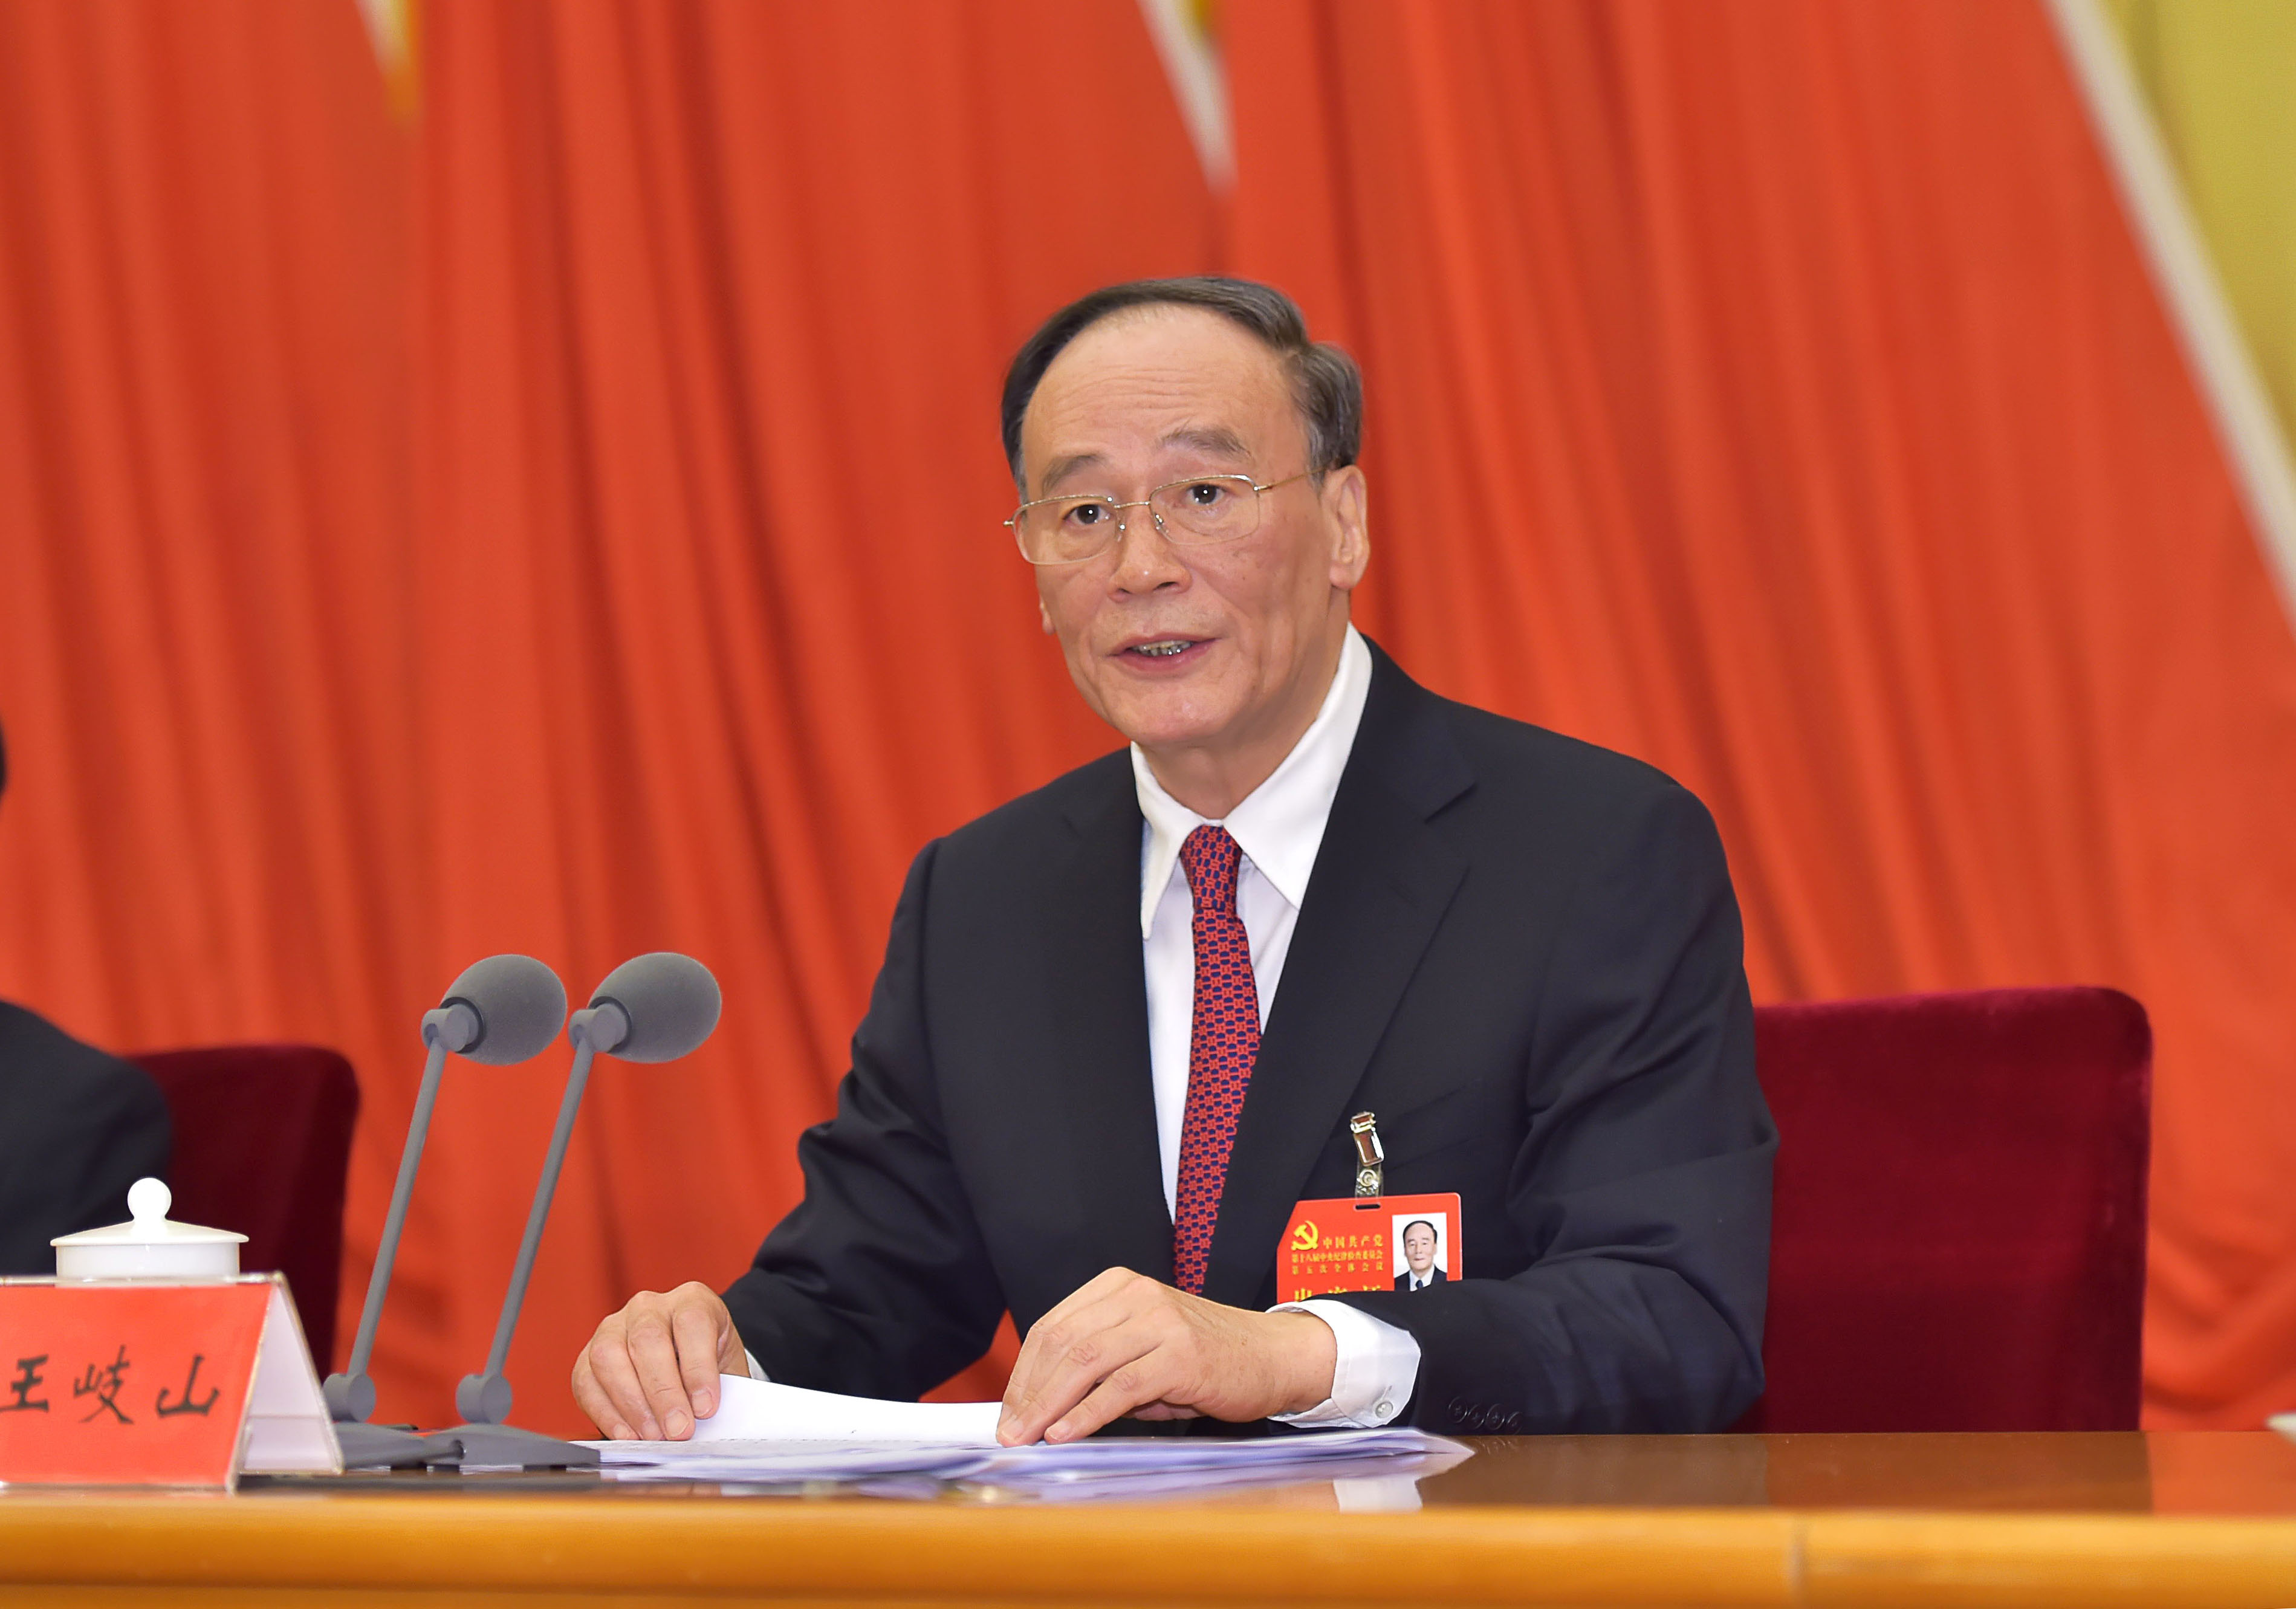 The government's anti-graft agency, led by Wang Qishan, has carried out spot checks on more than 60,000 officials since last year. Photo: Xinhua